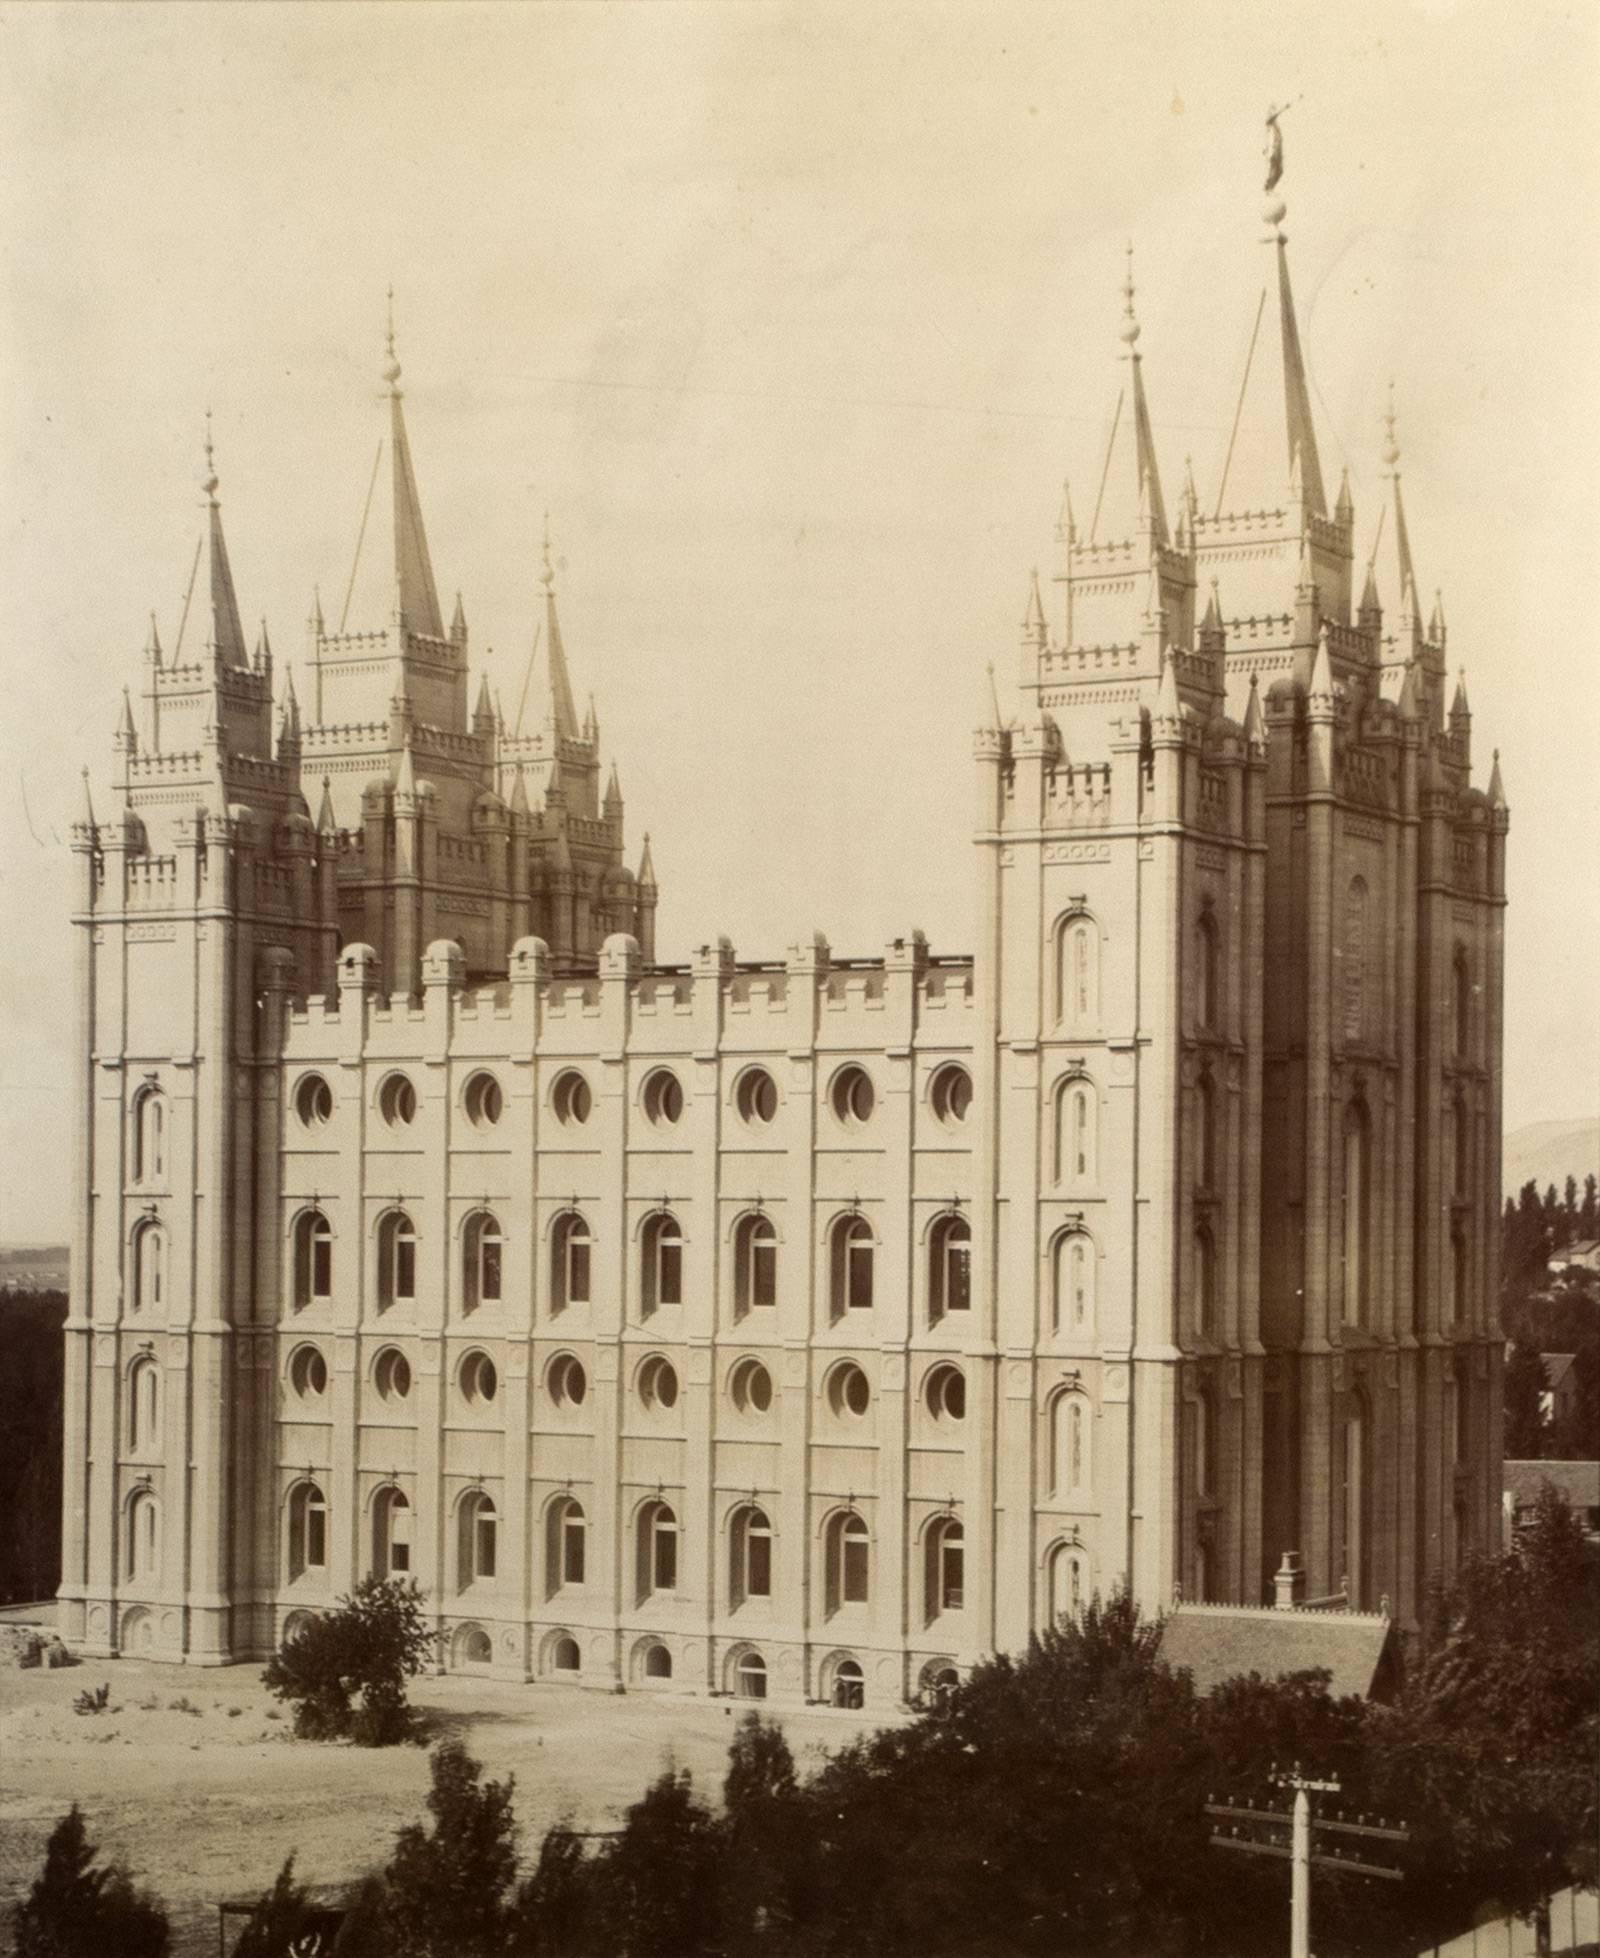 A photograph of the Salt Lake Temple taken in 1893, the year of the building's dedication.  Constructed at great cost and sacrifice, the Temple is perhaps the most sacred building to members of the Church of Jesus Christ of Latter-Day Saints (a.k.a.